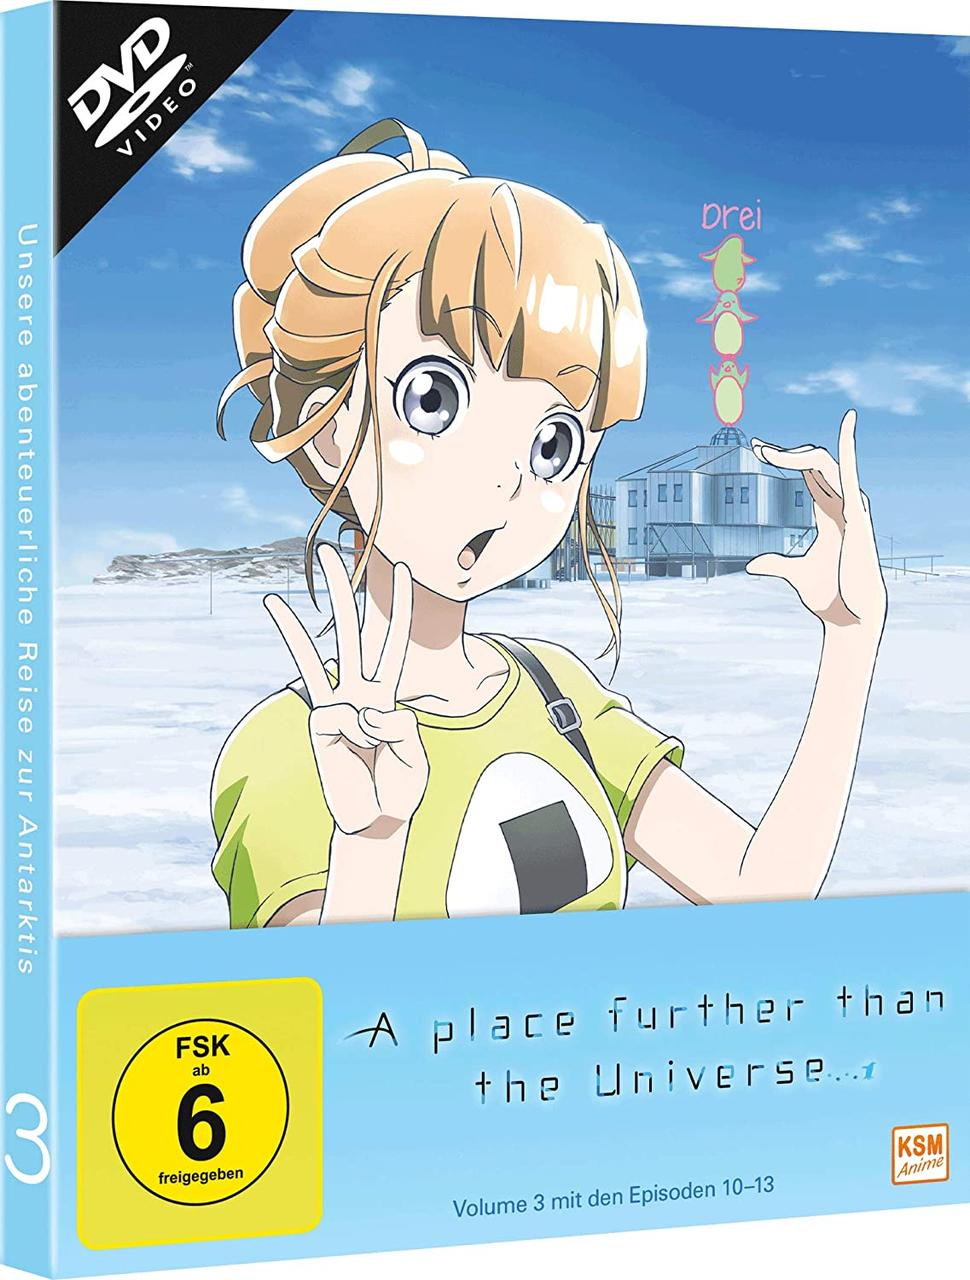 DVD Further Universe Place - 3 Than 10-13) The (Episode Volume A